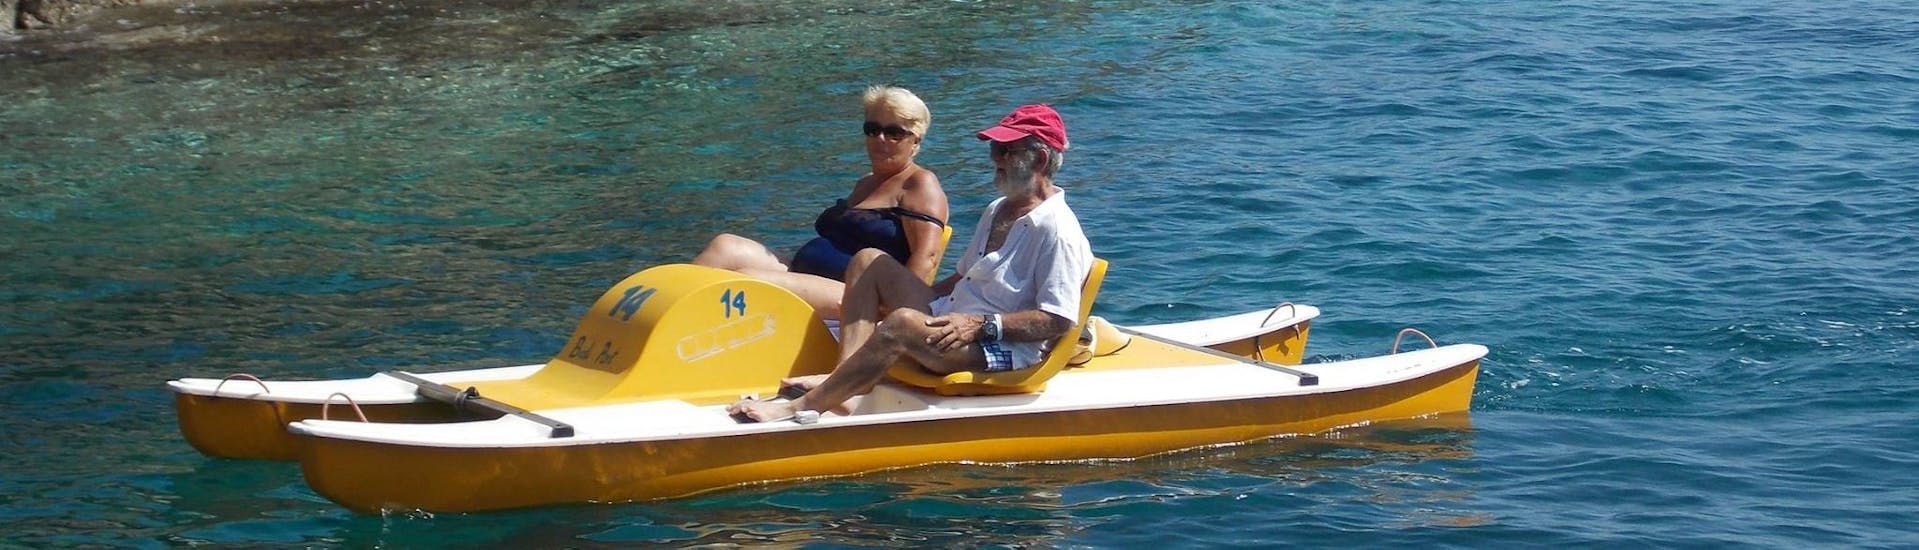 Two old people are spending a peaceful moment together on the pedal boat during the Pedal Boat at Bali on Crete with The Skippers Bali.